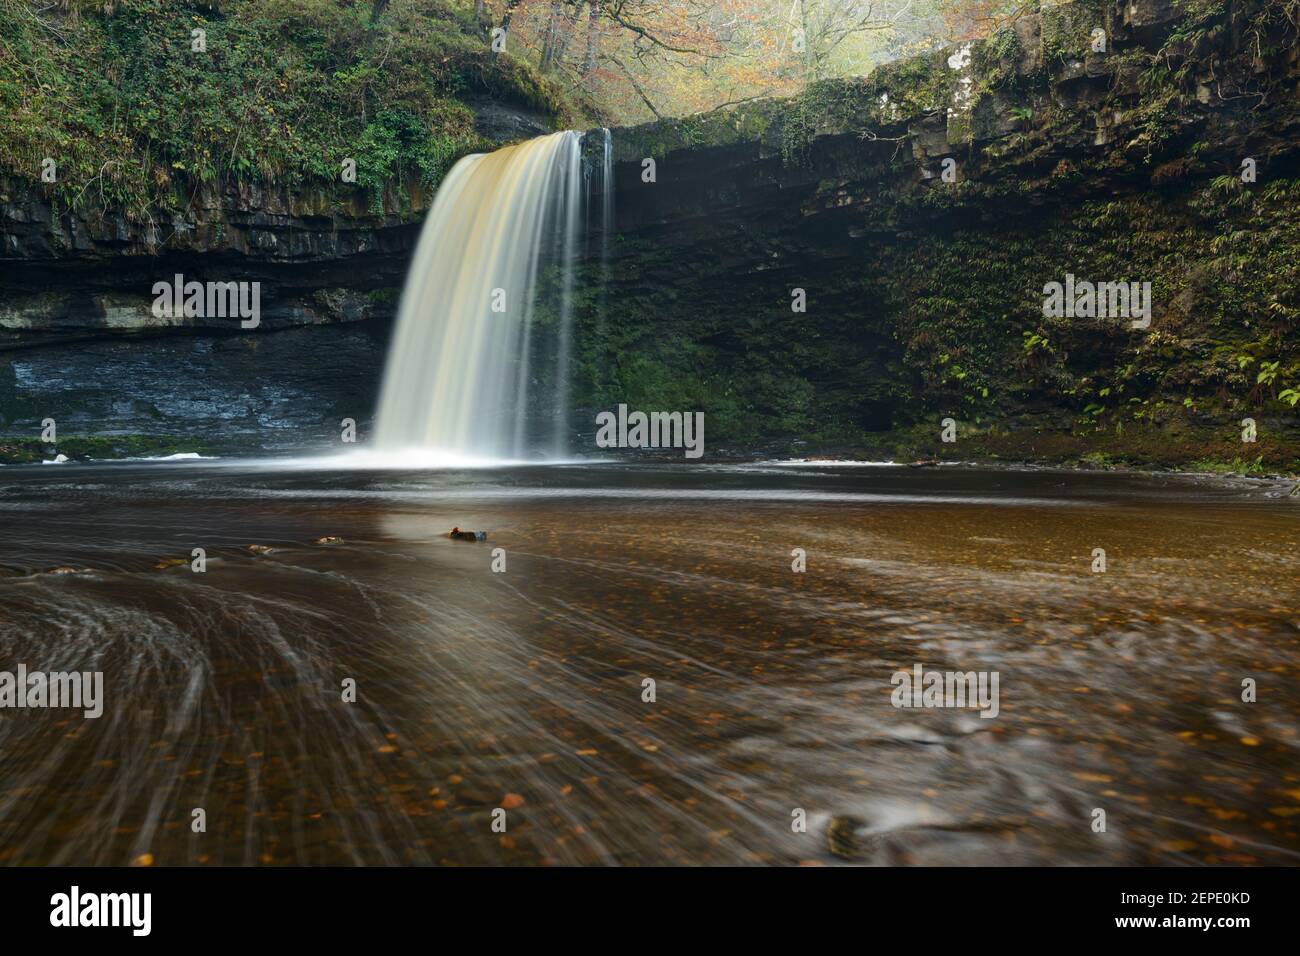 Sgwd Gwladys surrounded by autumnal foliage in the Brecon Beacons, Wales. Stock Photo